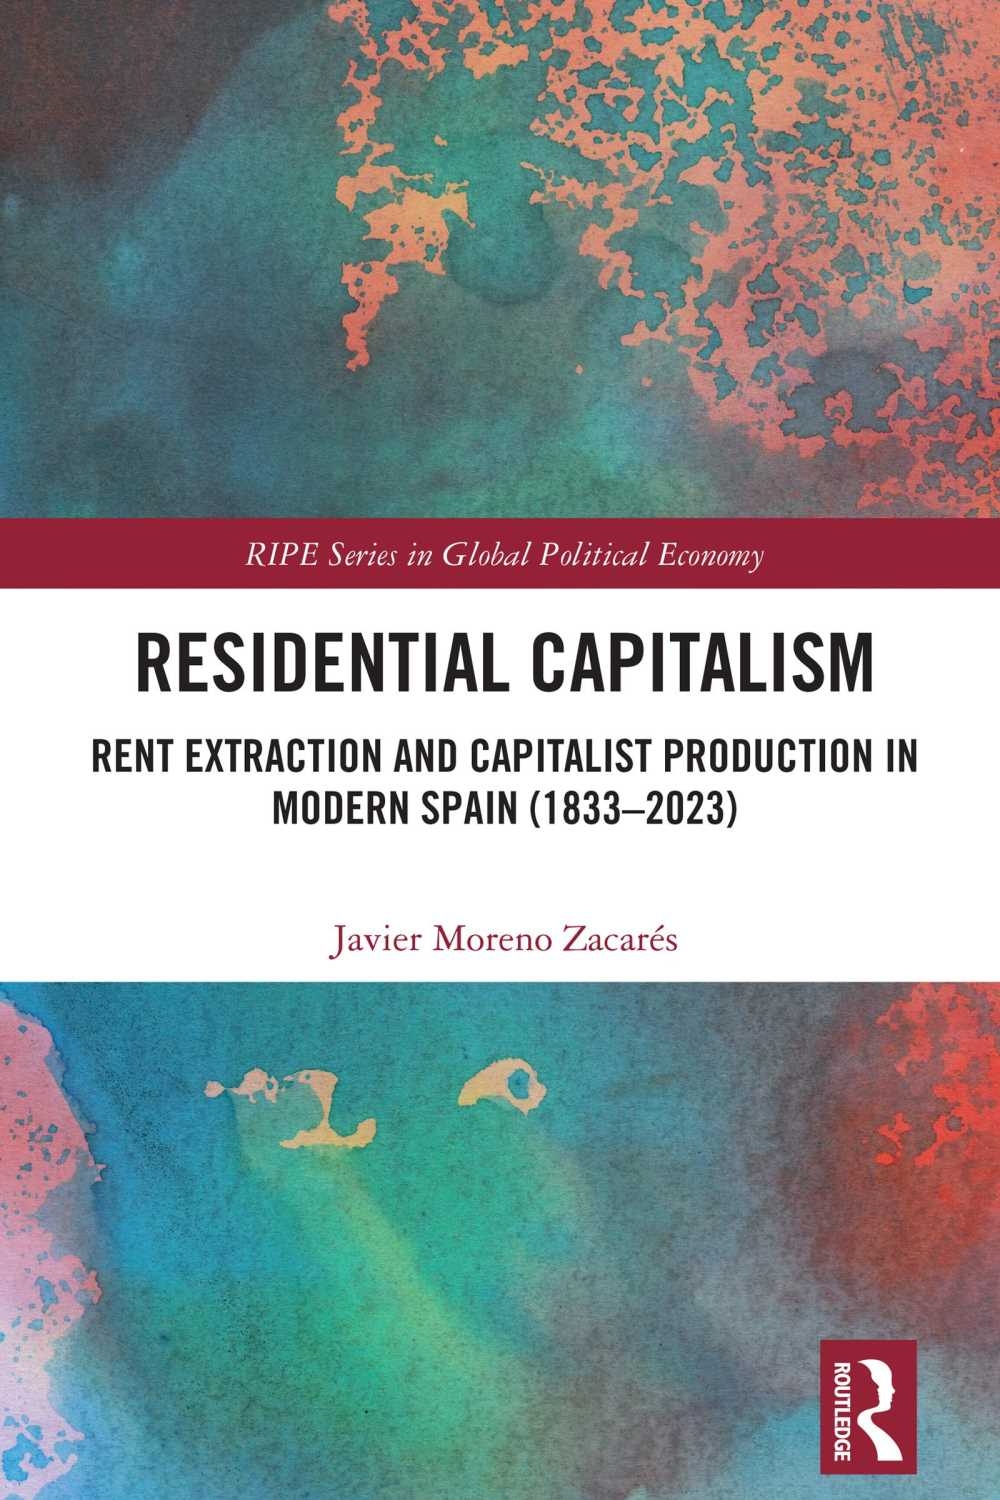 Residential Capitalism: Rent Extraction and Capitalist Production in Modern Spain (1833-2023)